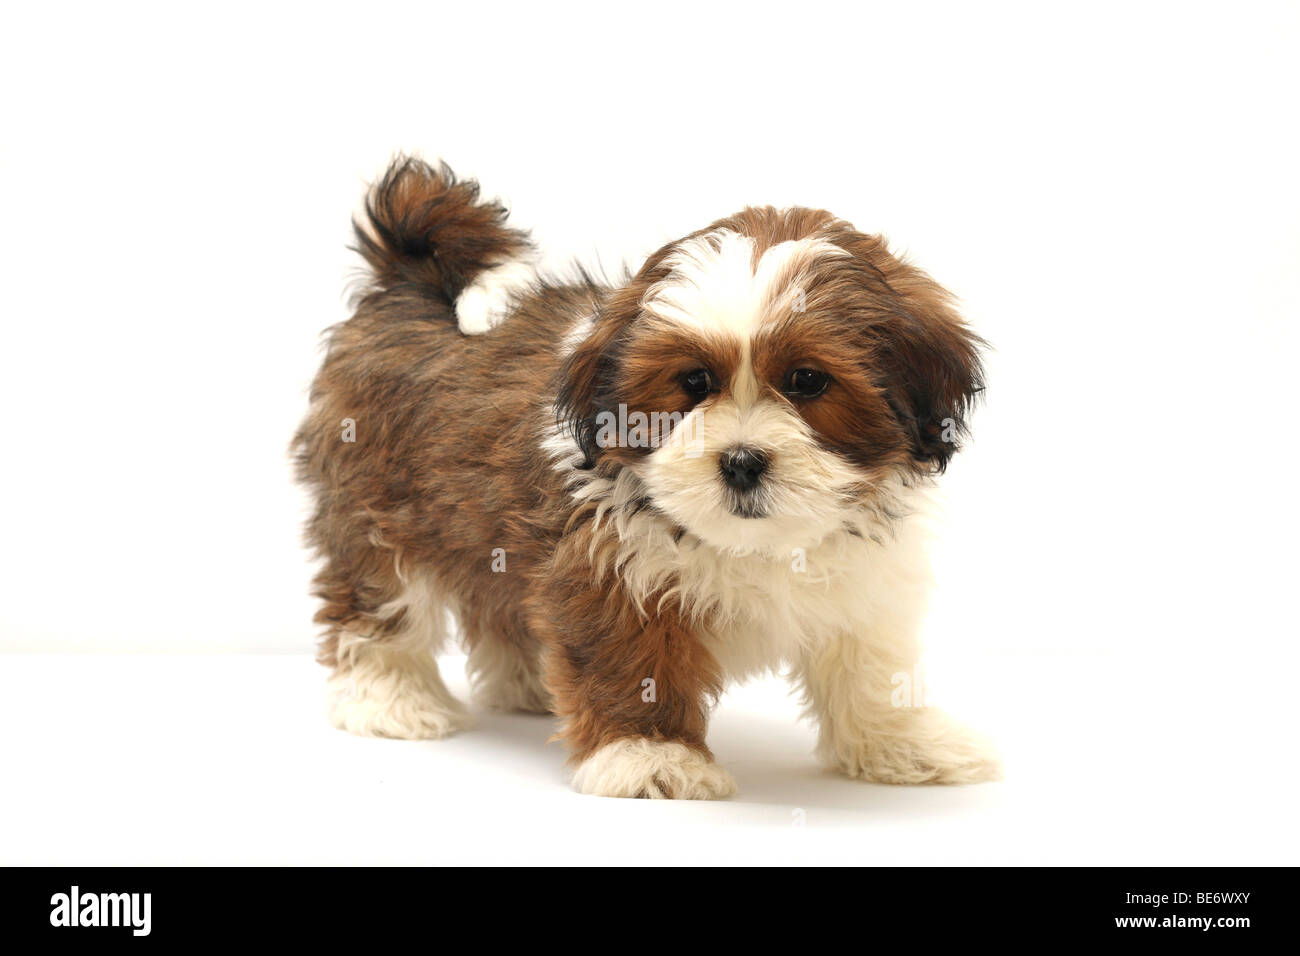 Lhasa Apso Puppy High Resolution Stock Photography and Images - Alamy